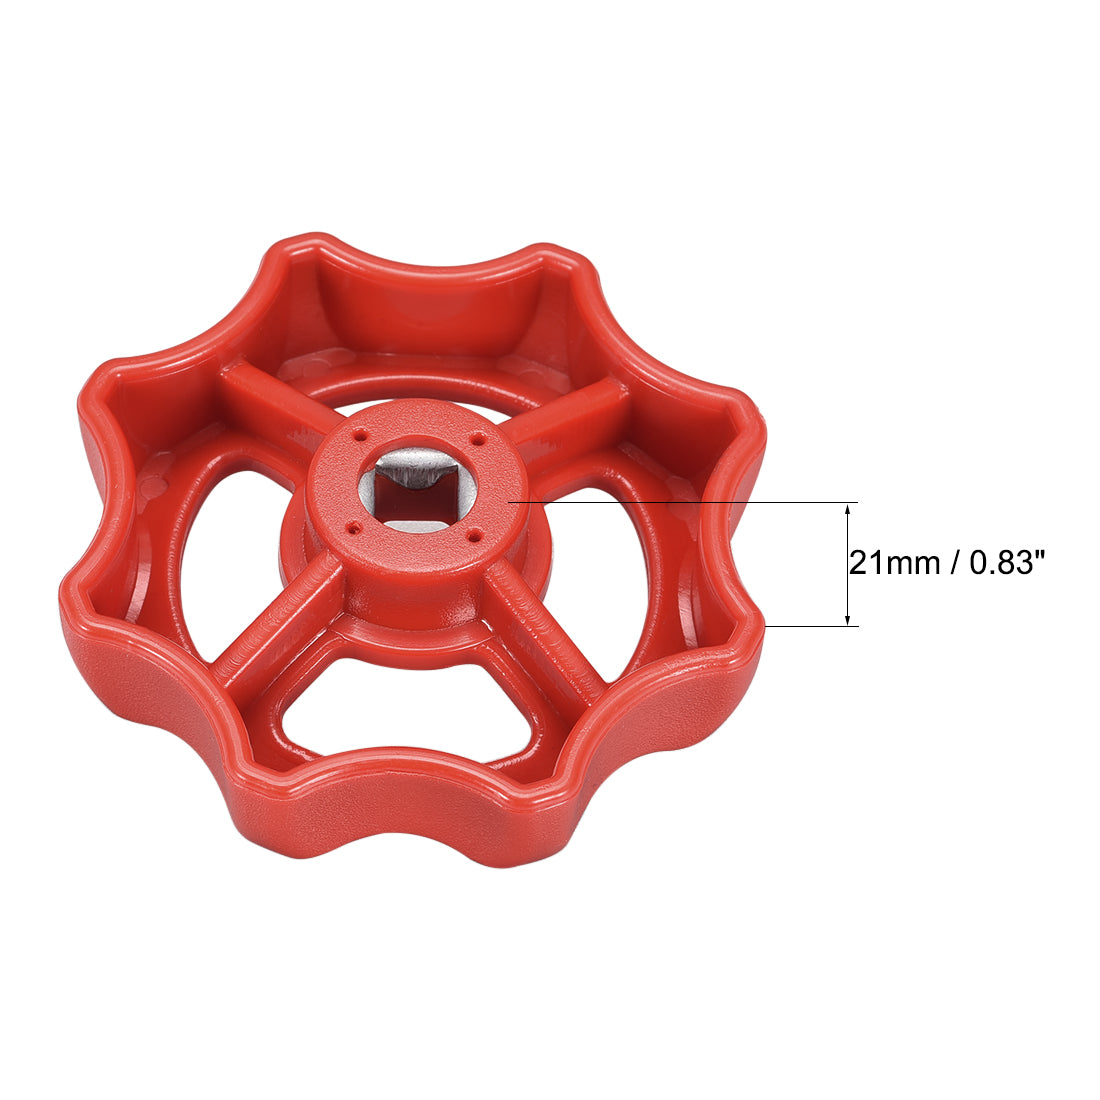 Uxcell Uxcell Round Wheel Handle, Square Broach 8x8mm, Wheel OD 74mm ABS Red 4Pcs